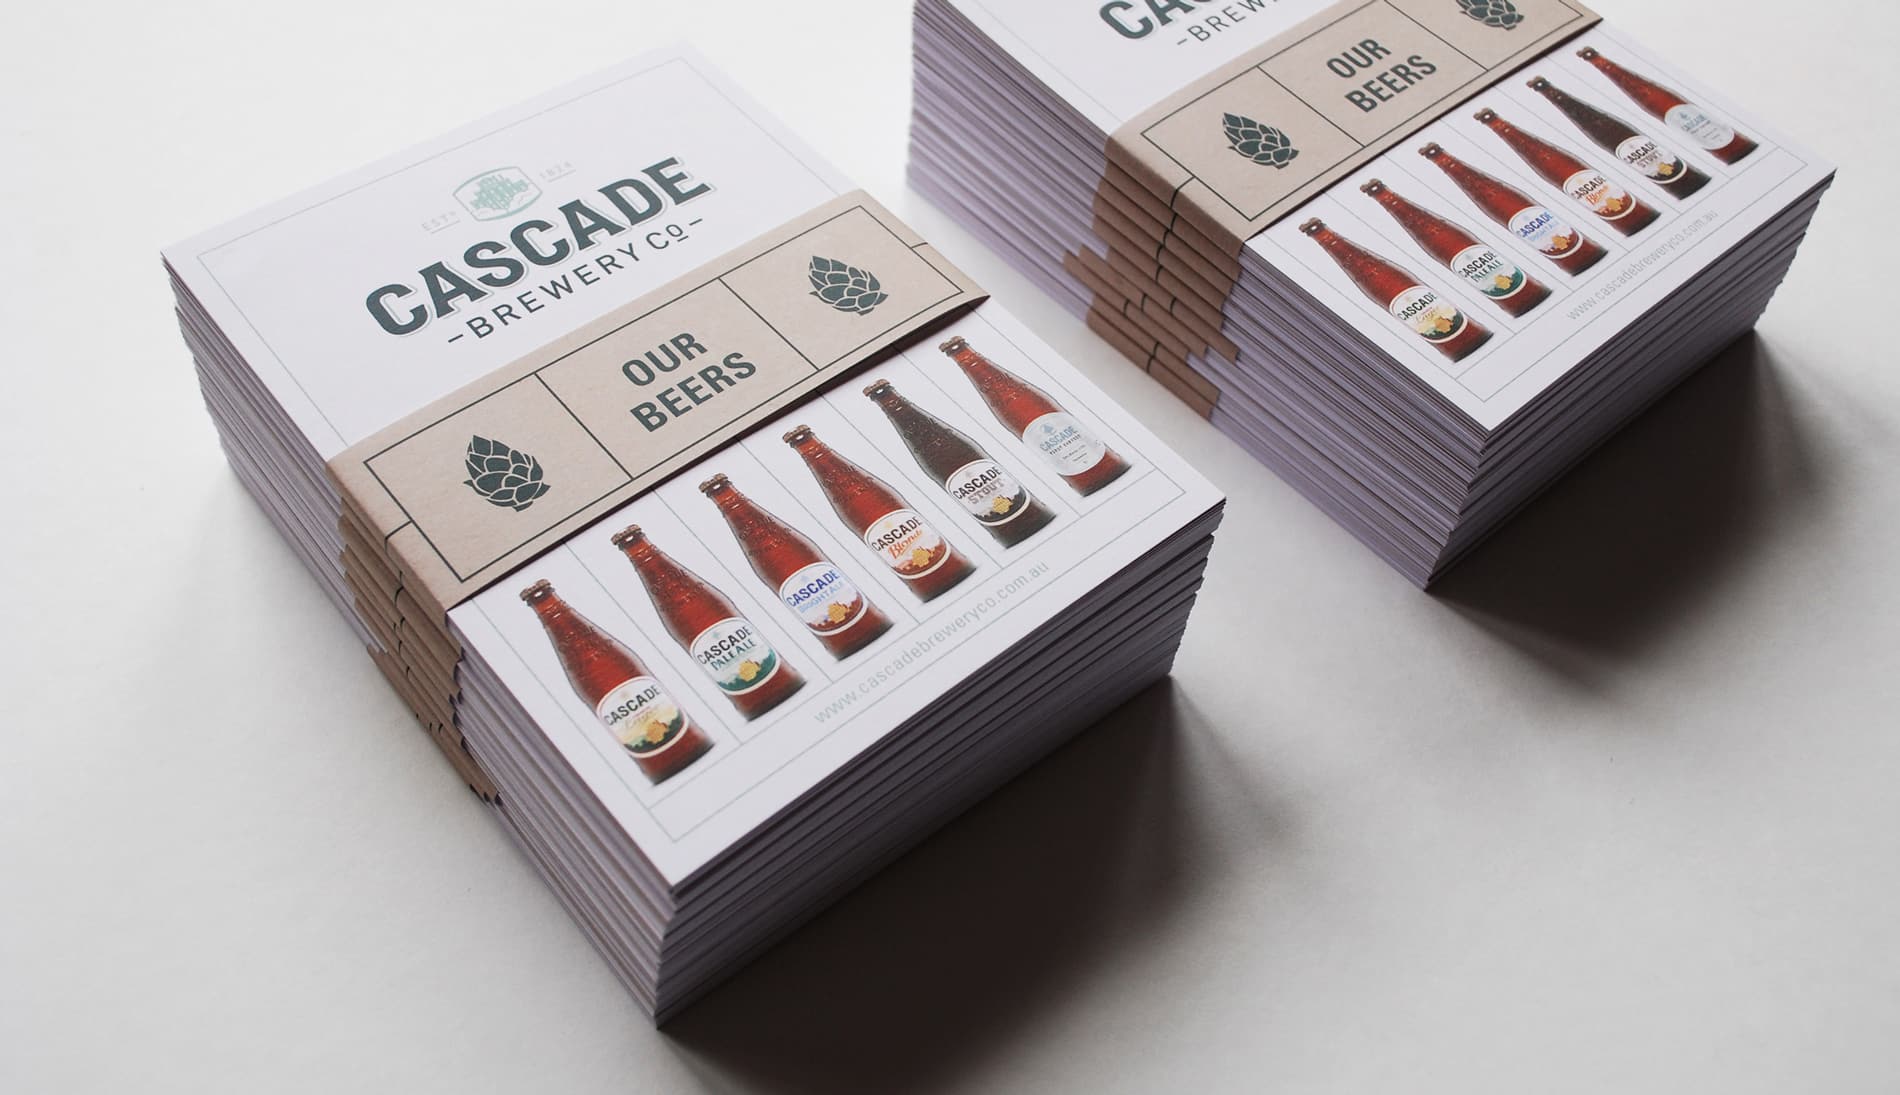 Cascade Brewery Co Tasting Notes - Print Design and Production